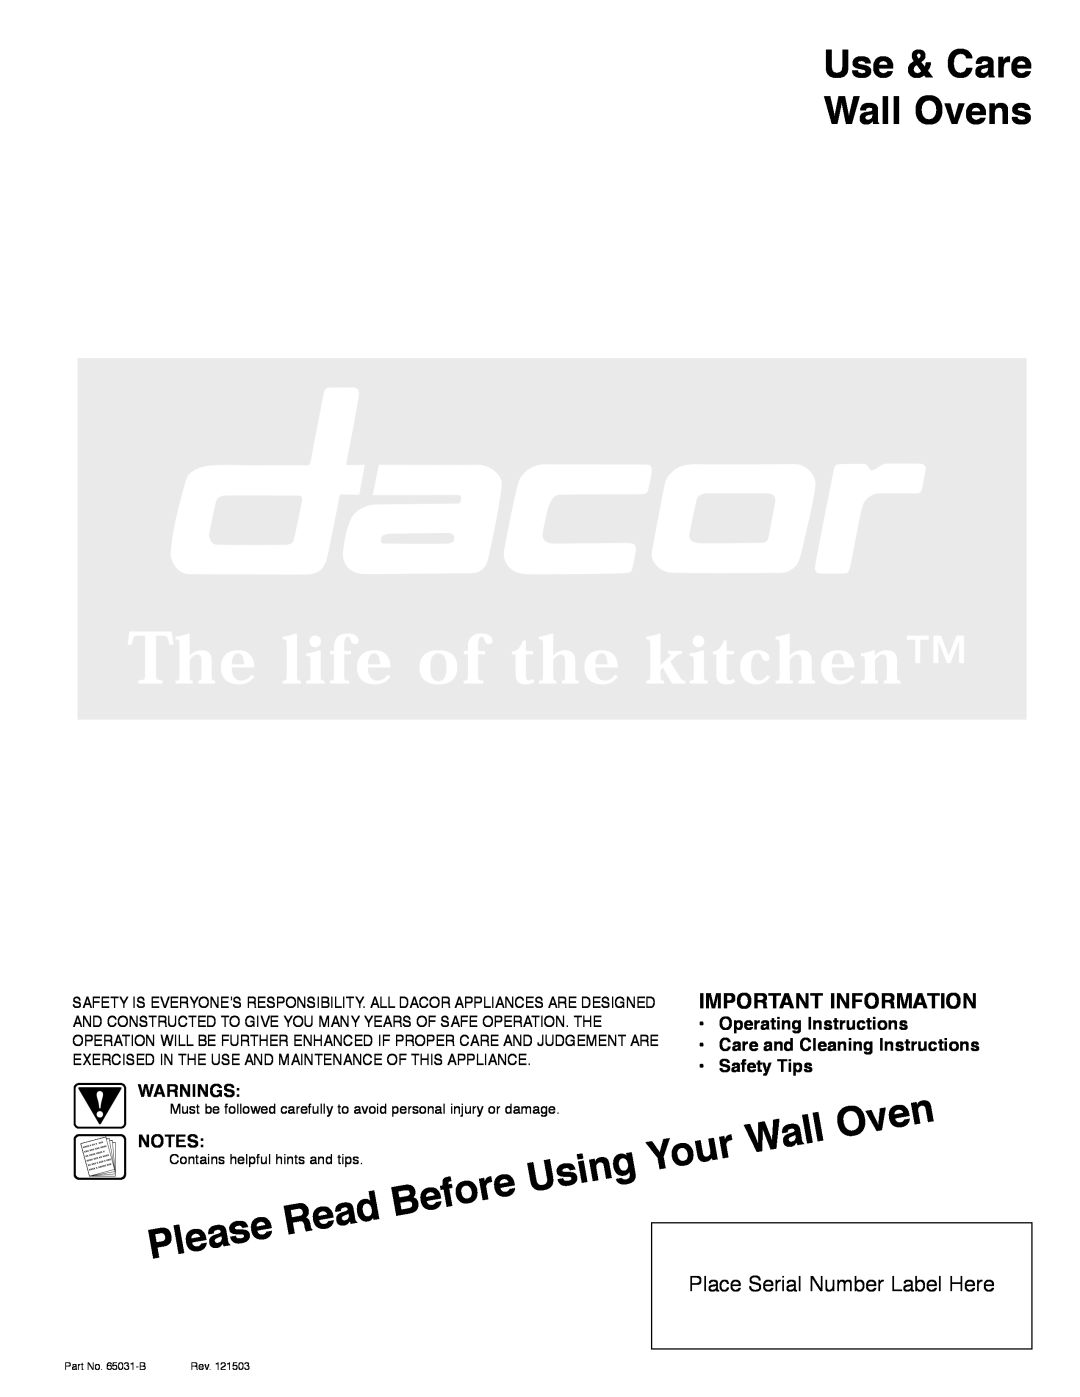 Dacor ACS273, ACS303, ACS363 manual Use & Care Wall Ovens, Important Information, Place Serial Number Label Here 